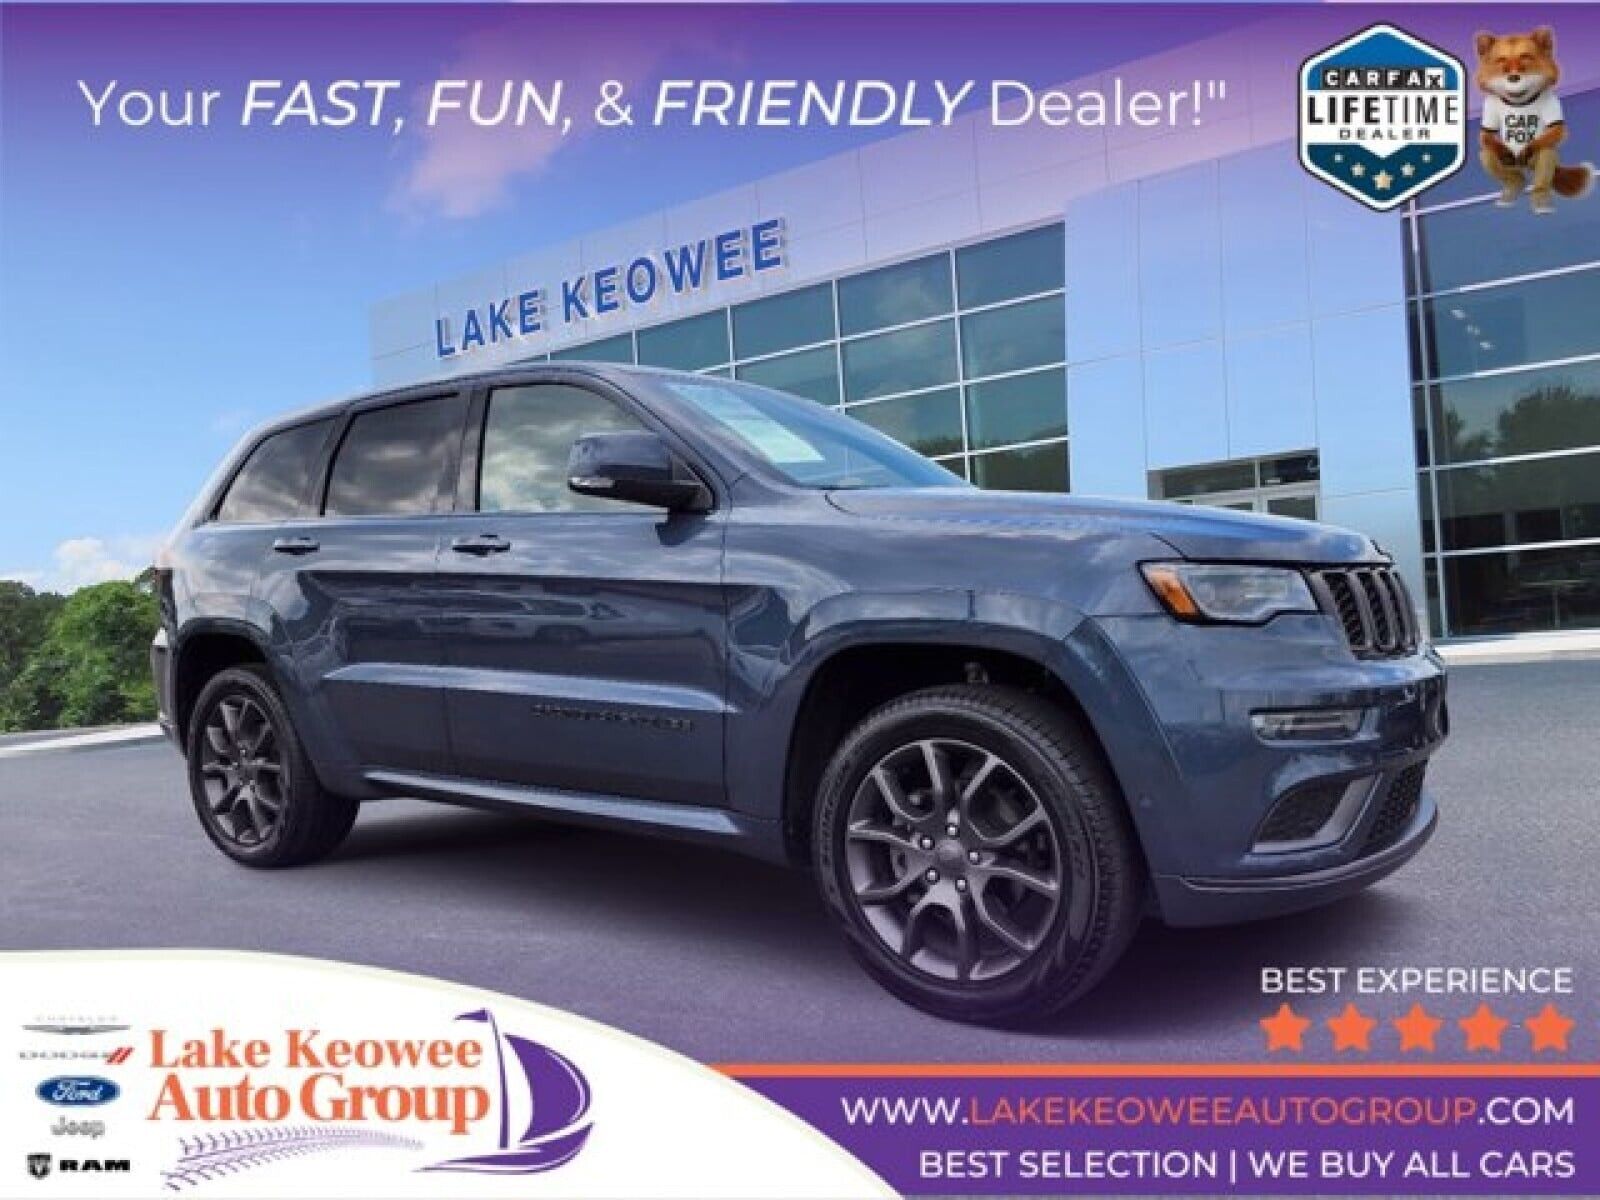 2020 Jeep Grand Cherokee, BLUE with 22162 Miles available now!